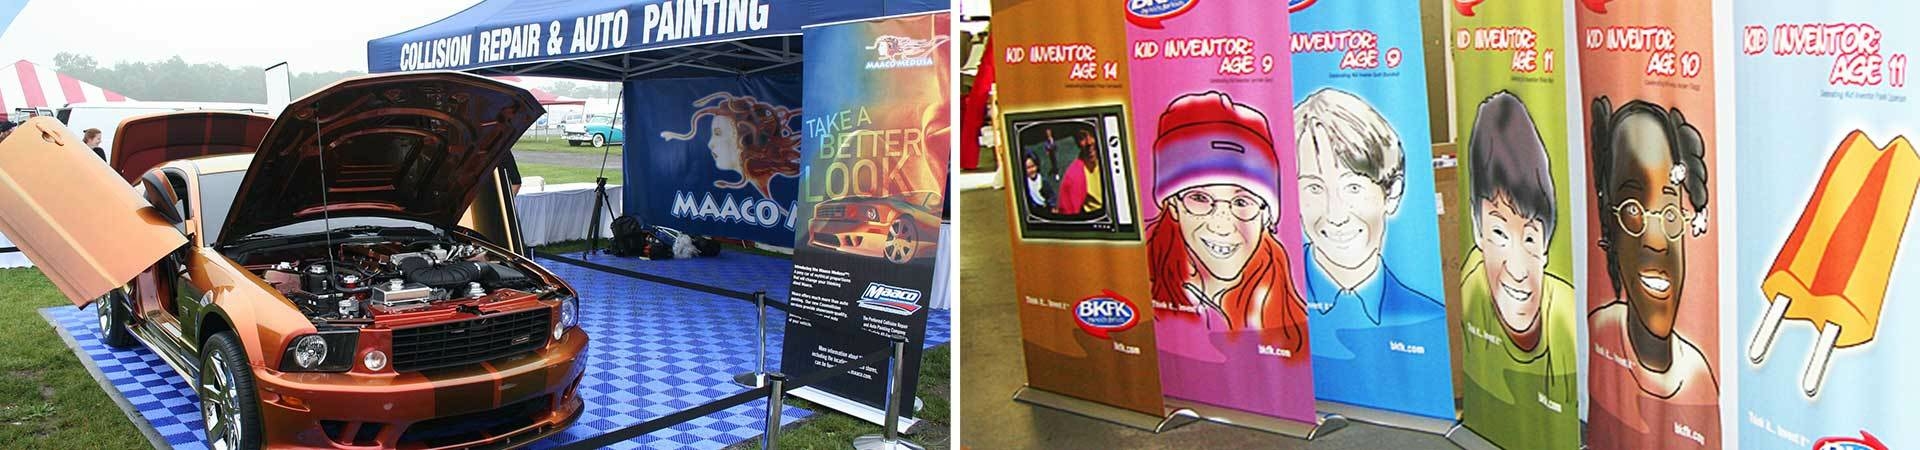 Retractable banner stand with custom graphics at an event activation.